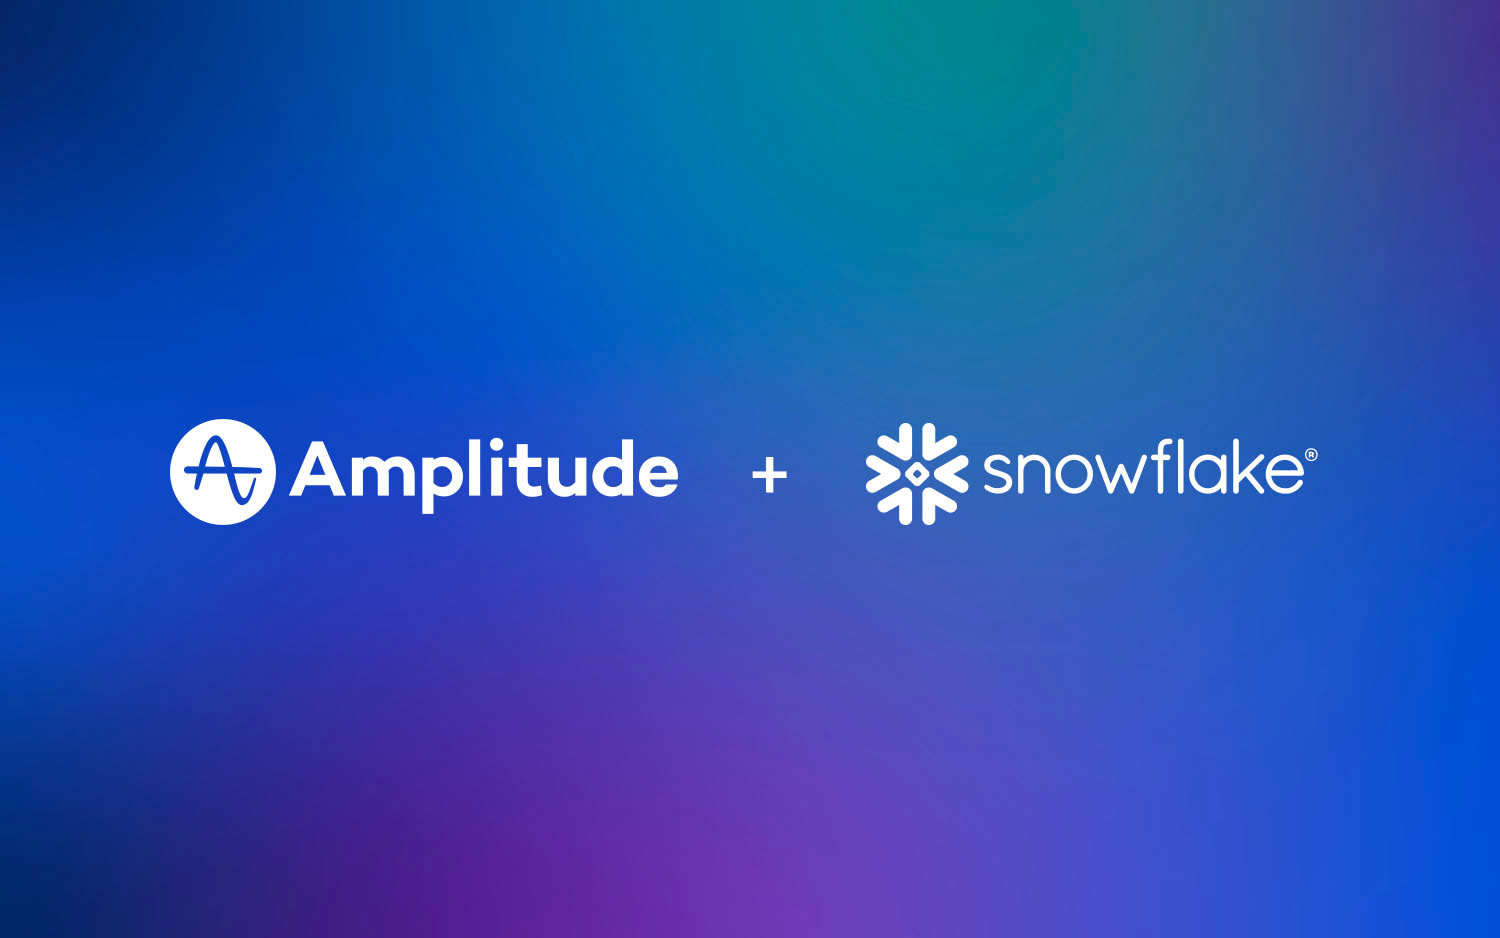 New Snowflake Integration Delivers the Modern Data Stack